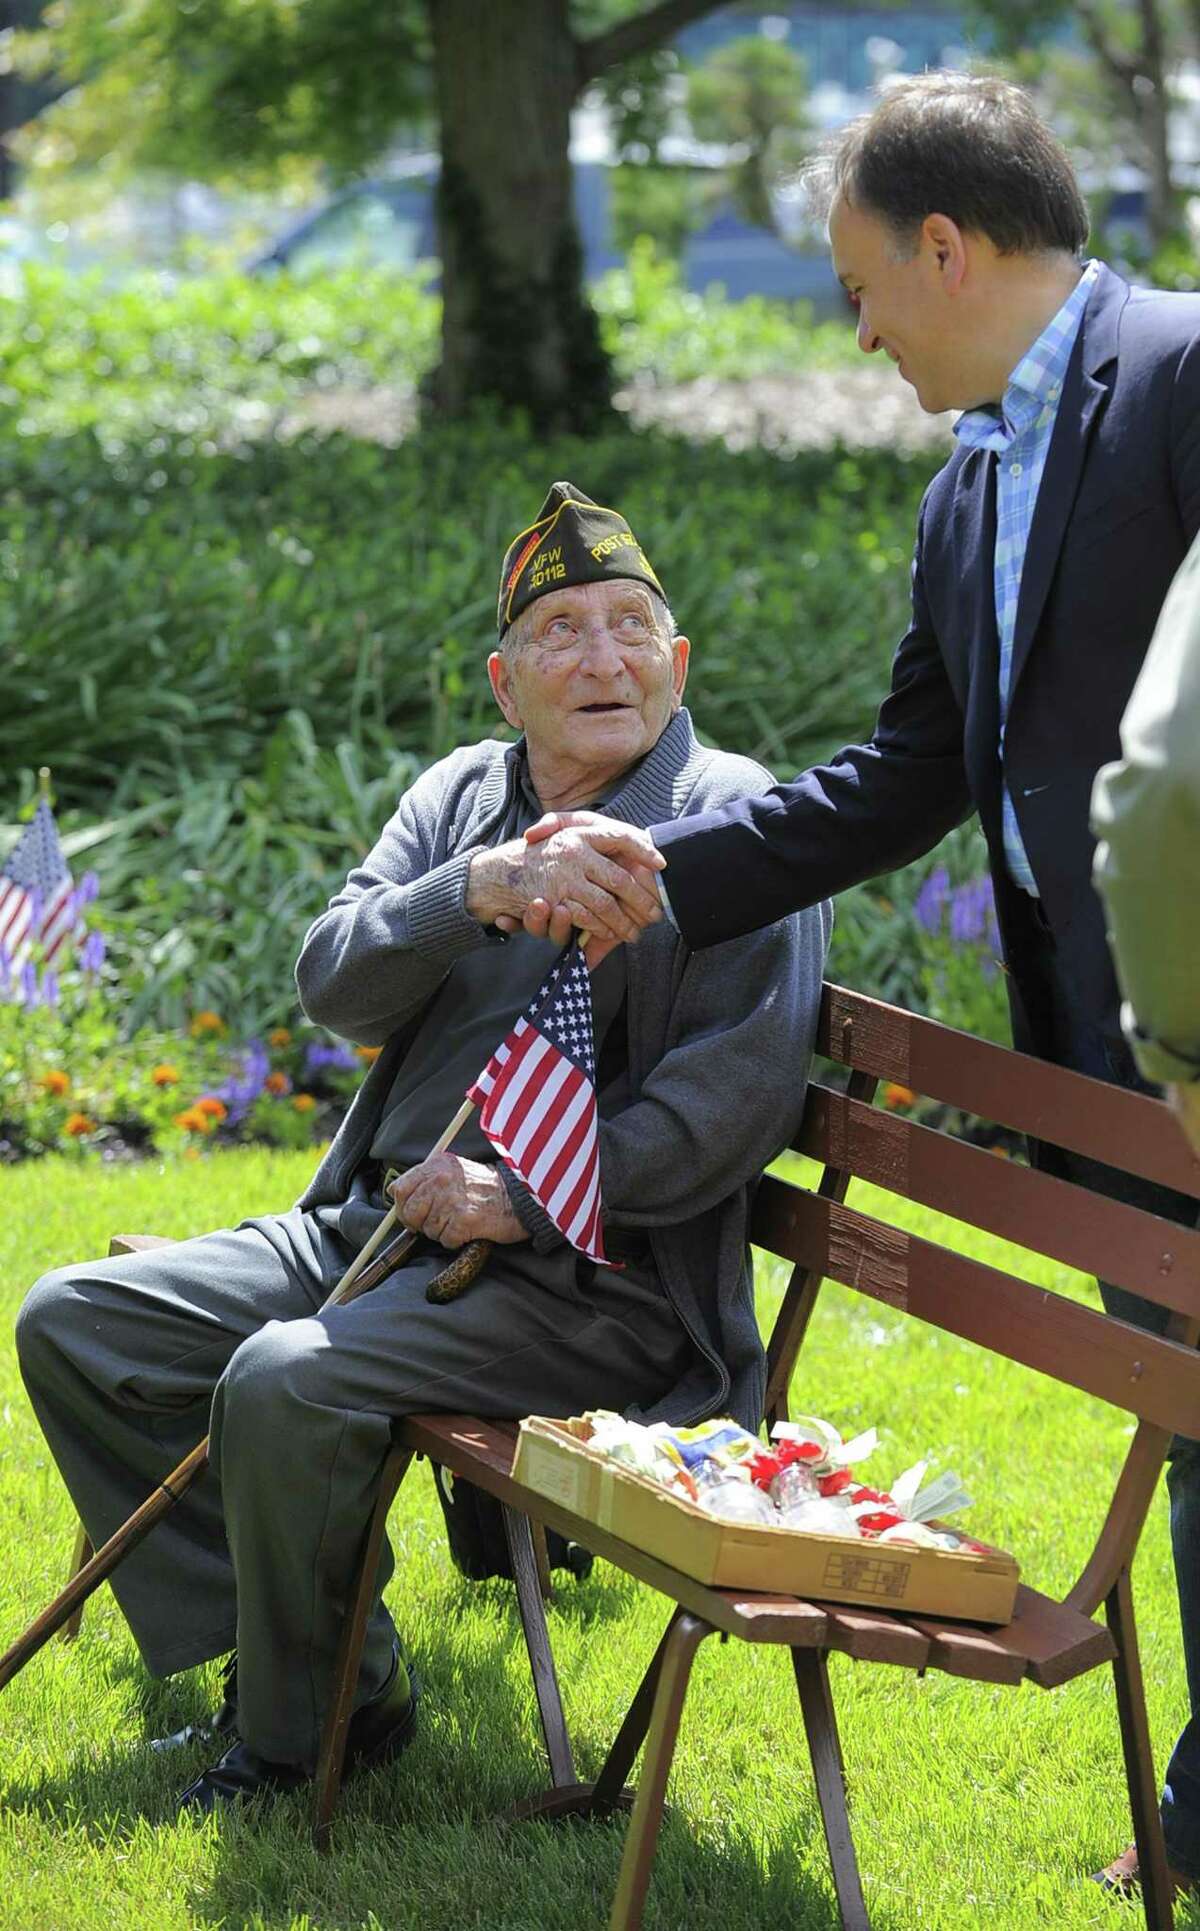 Fred Intrieri, 92, of Greenwich is greeted by Greenwich First Selectmen Peter Tesei prior to the Cos Cob VFW Post 10112 Memorial Day Ceremony to honor those who died for our country while serving in the United States Armed Services at the Cos Cob Dock VFW memorial in Greenwich, Conn. on Saturday, May 27, 2017. Intreri served in the Army during WWII.